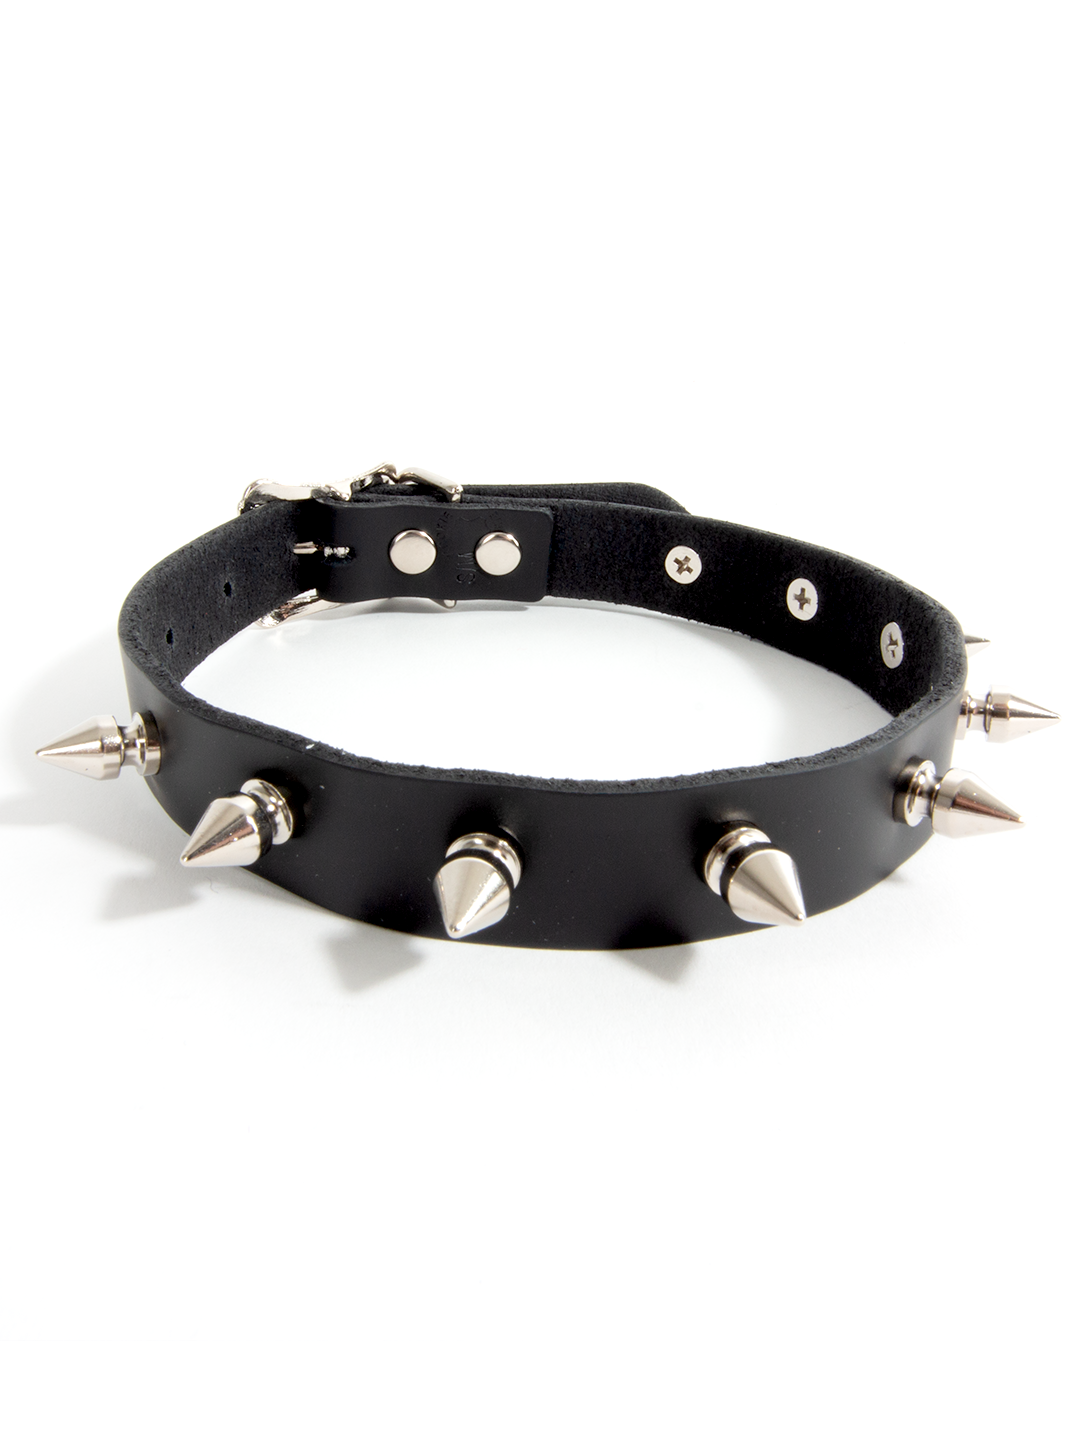 Leather Spiked Collar